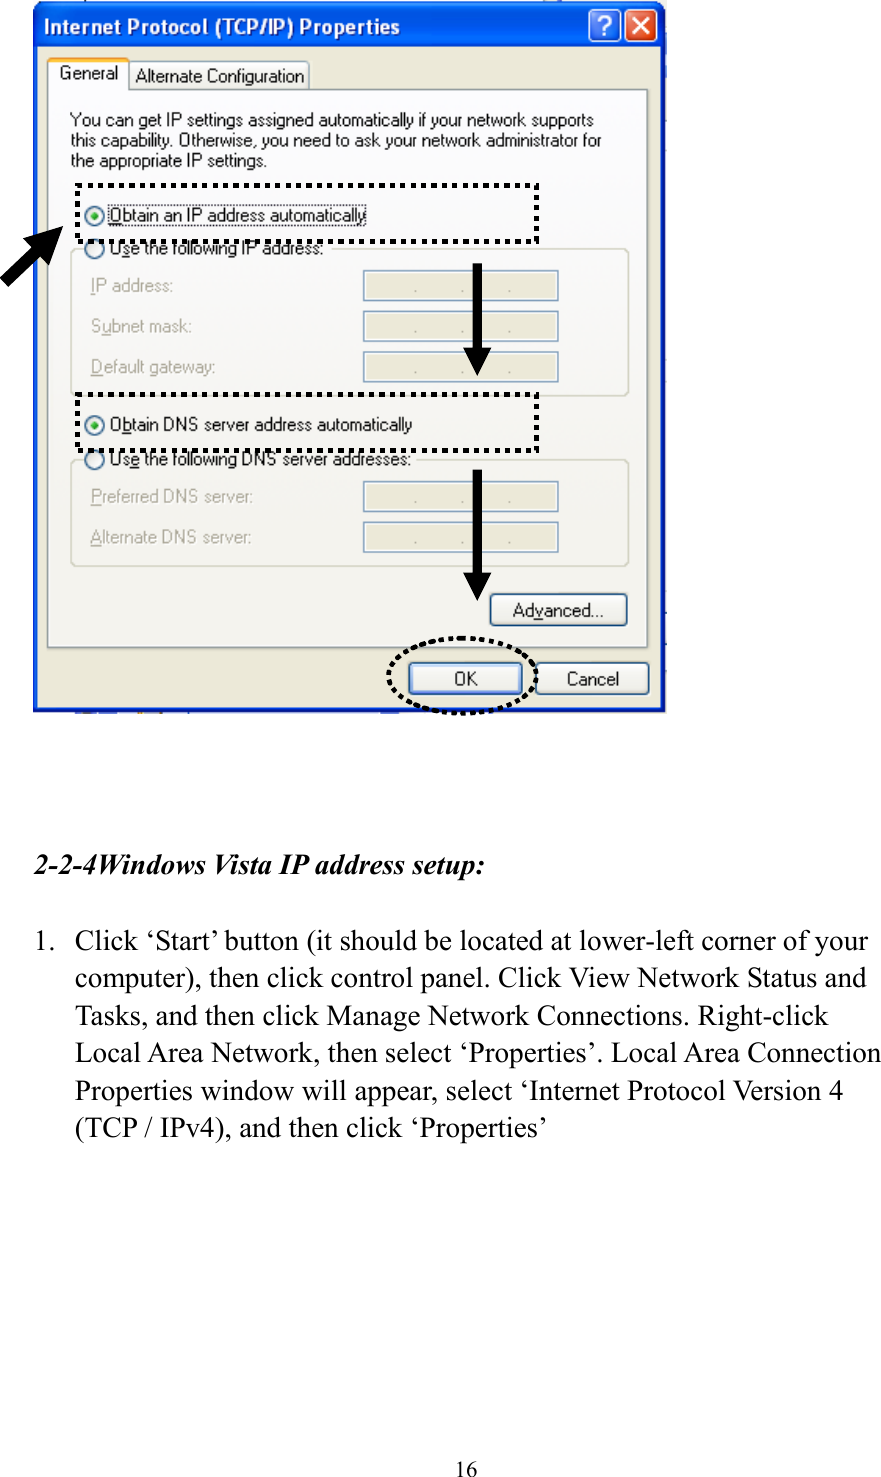 16     2-2-4Windows Vista IP address setup:  1. Click ‘Start’ button (it should be located at lower-left corner of your computer), then click control panel. Click View Network Status and Tasks, and then click Manage Network Connections. Right-click Local Area Network, then select ‘Properties’. Local Area Connection Properties window will appear, select ‘Internet Protocol Version 4 (TCP / IPv4), and then click ‘Properties’  